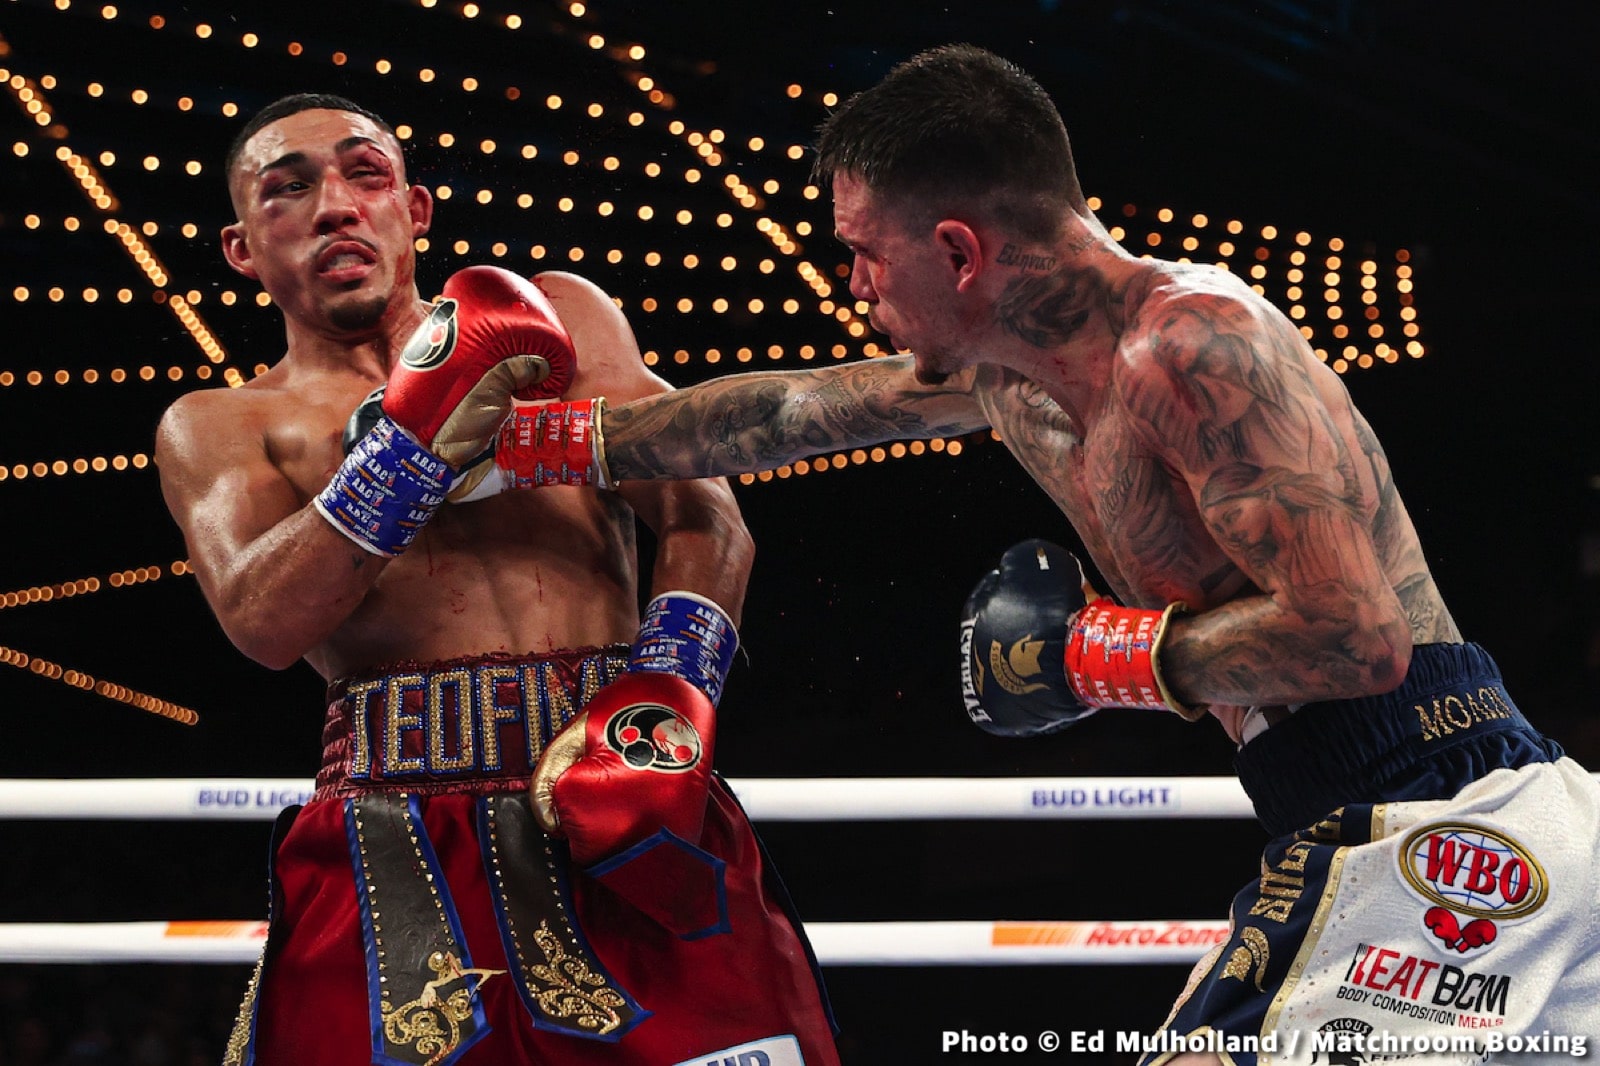 Teofimo Lopez expected to be out until May or June 2022